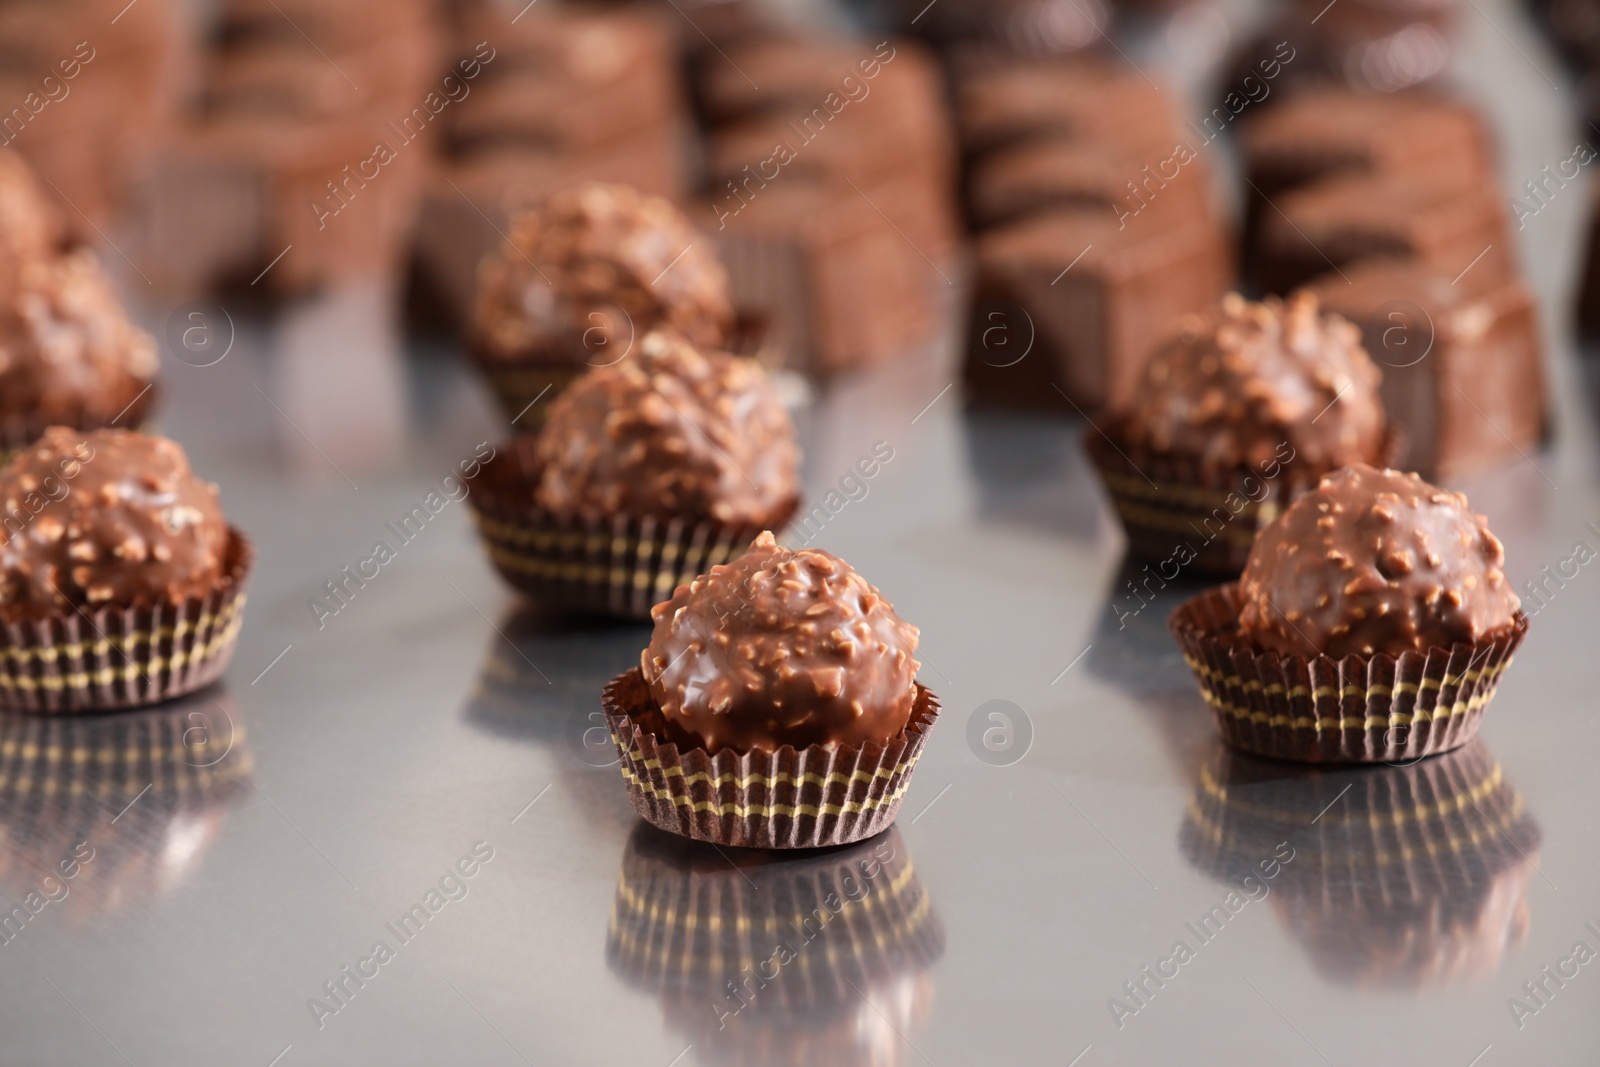 Photo of Many delicious chocolate candies on grey table. Production line